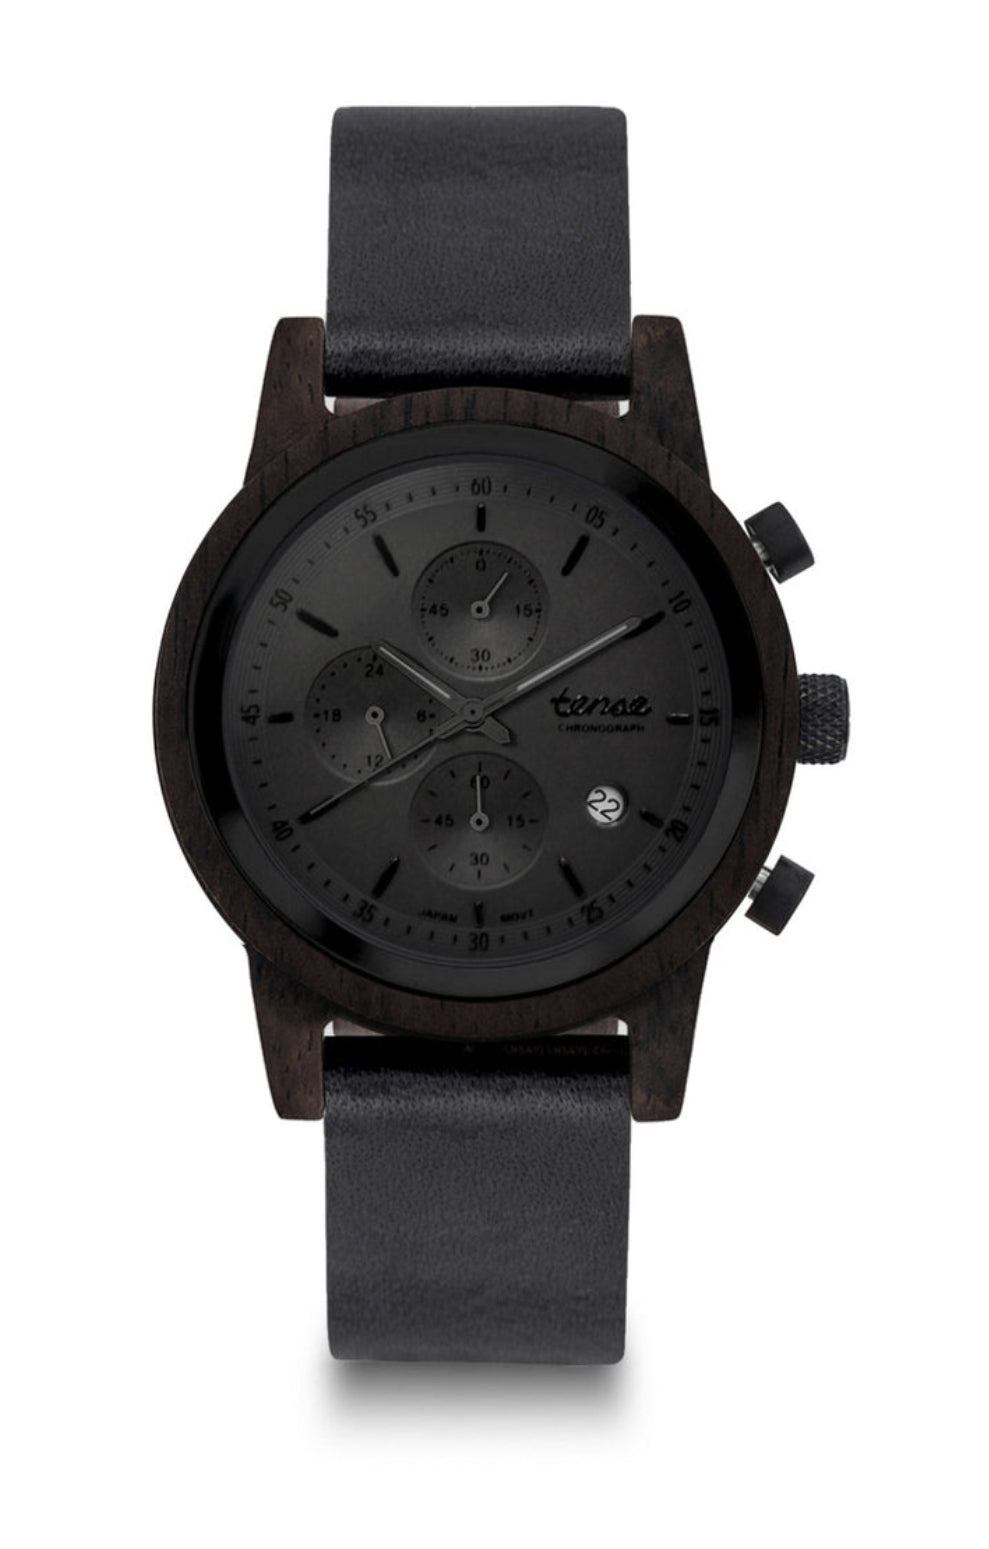 Cambridge Leather Leadwood/Blackout Watch locally Made in Canada 🇨🇦